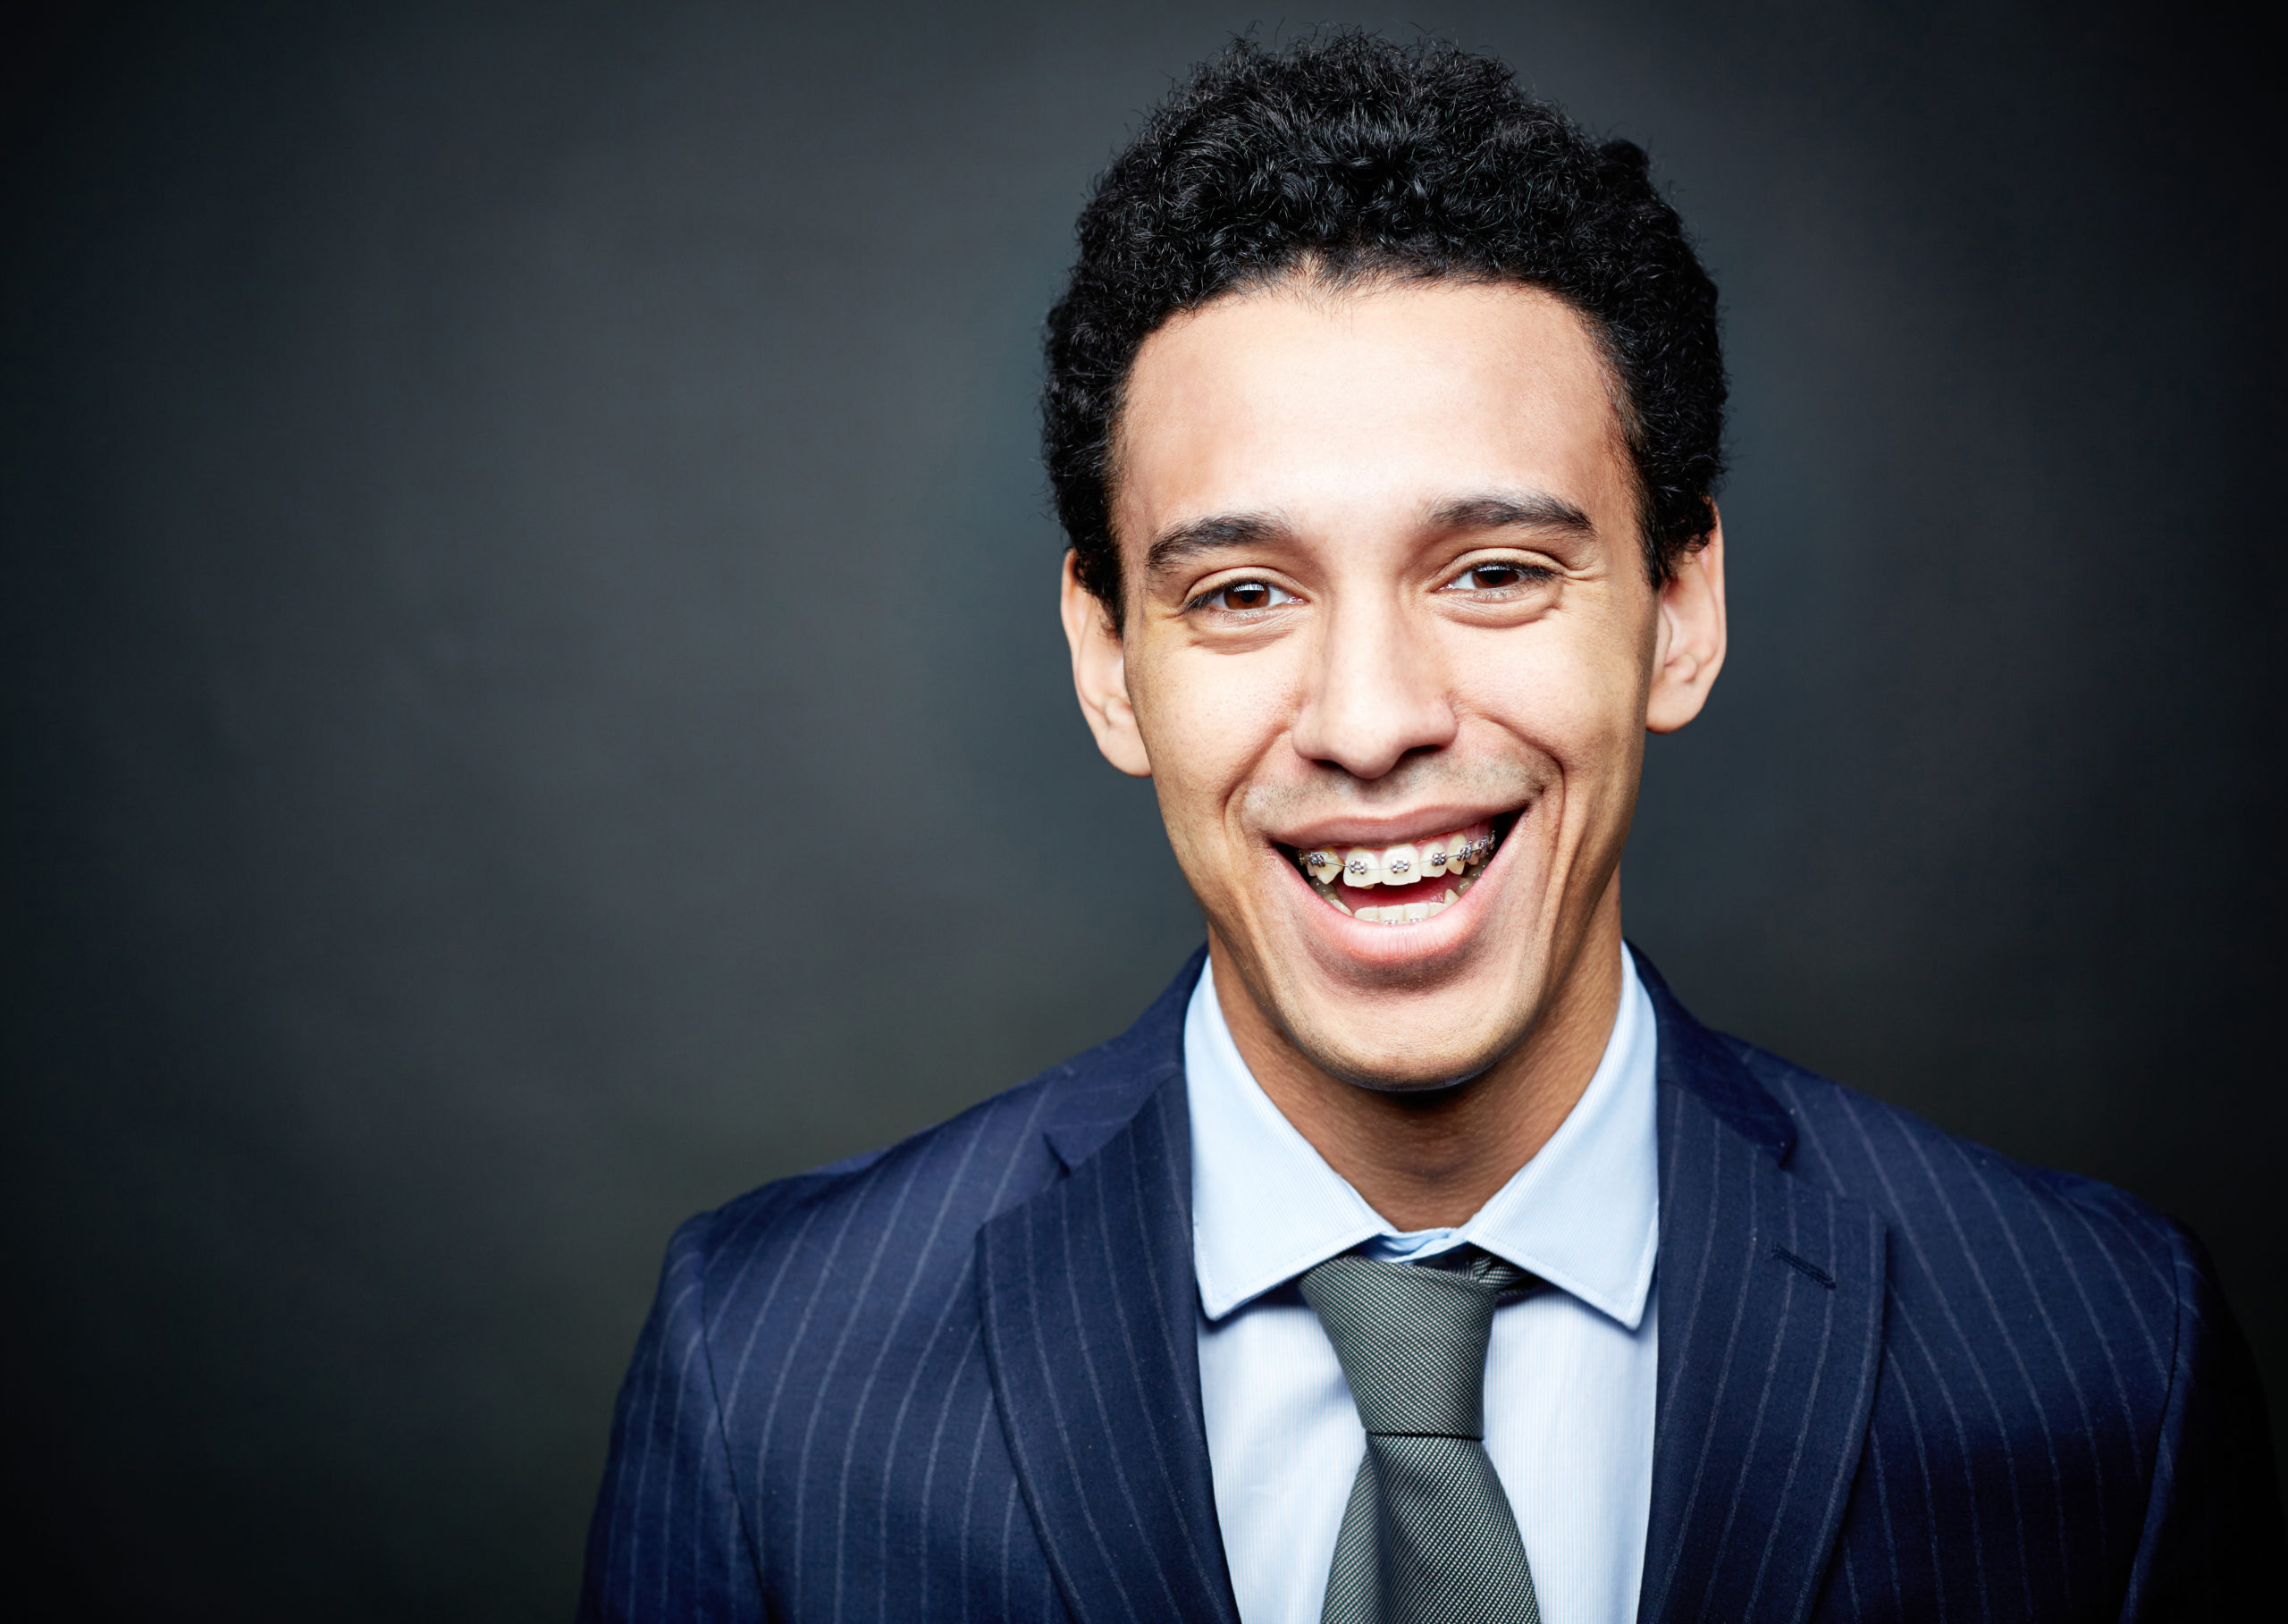 Young man in a suit with braces